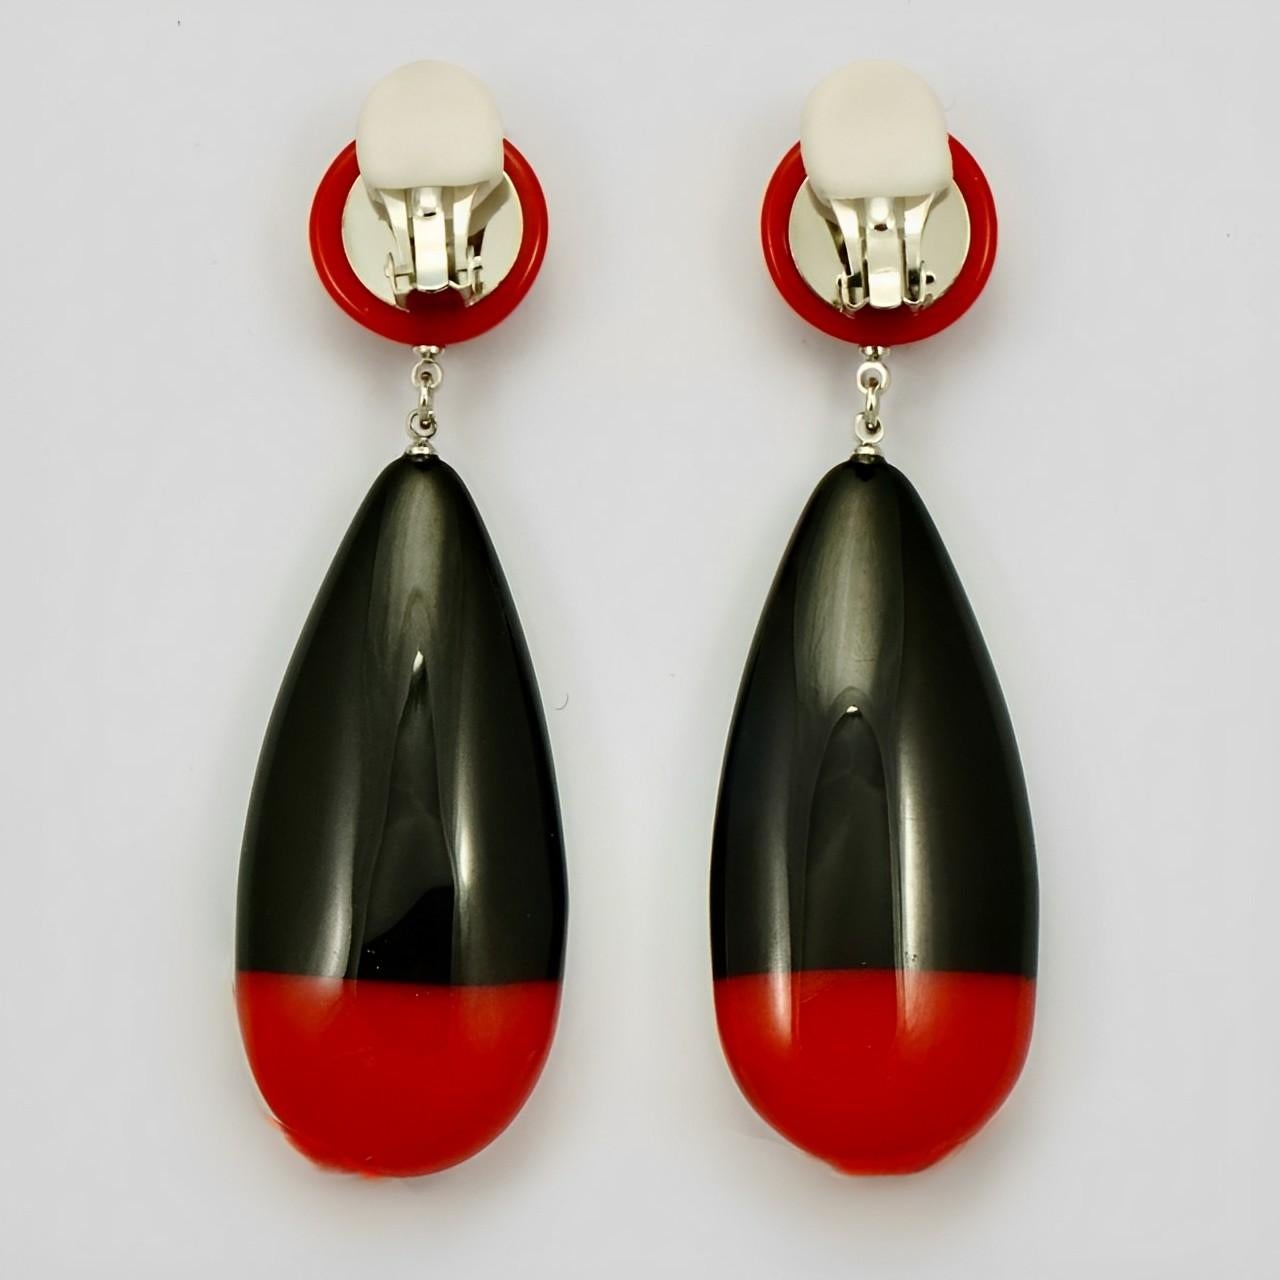 Marion Godart fantastic red and black shiny plastic drop earrings, they are clip ons. Length 8.8 cm / 3.46 inches, and maximum width 2.6 cm / 1 inch. The earrings are in very good condition. They have a lovely organic shape and feel.

These are